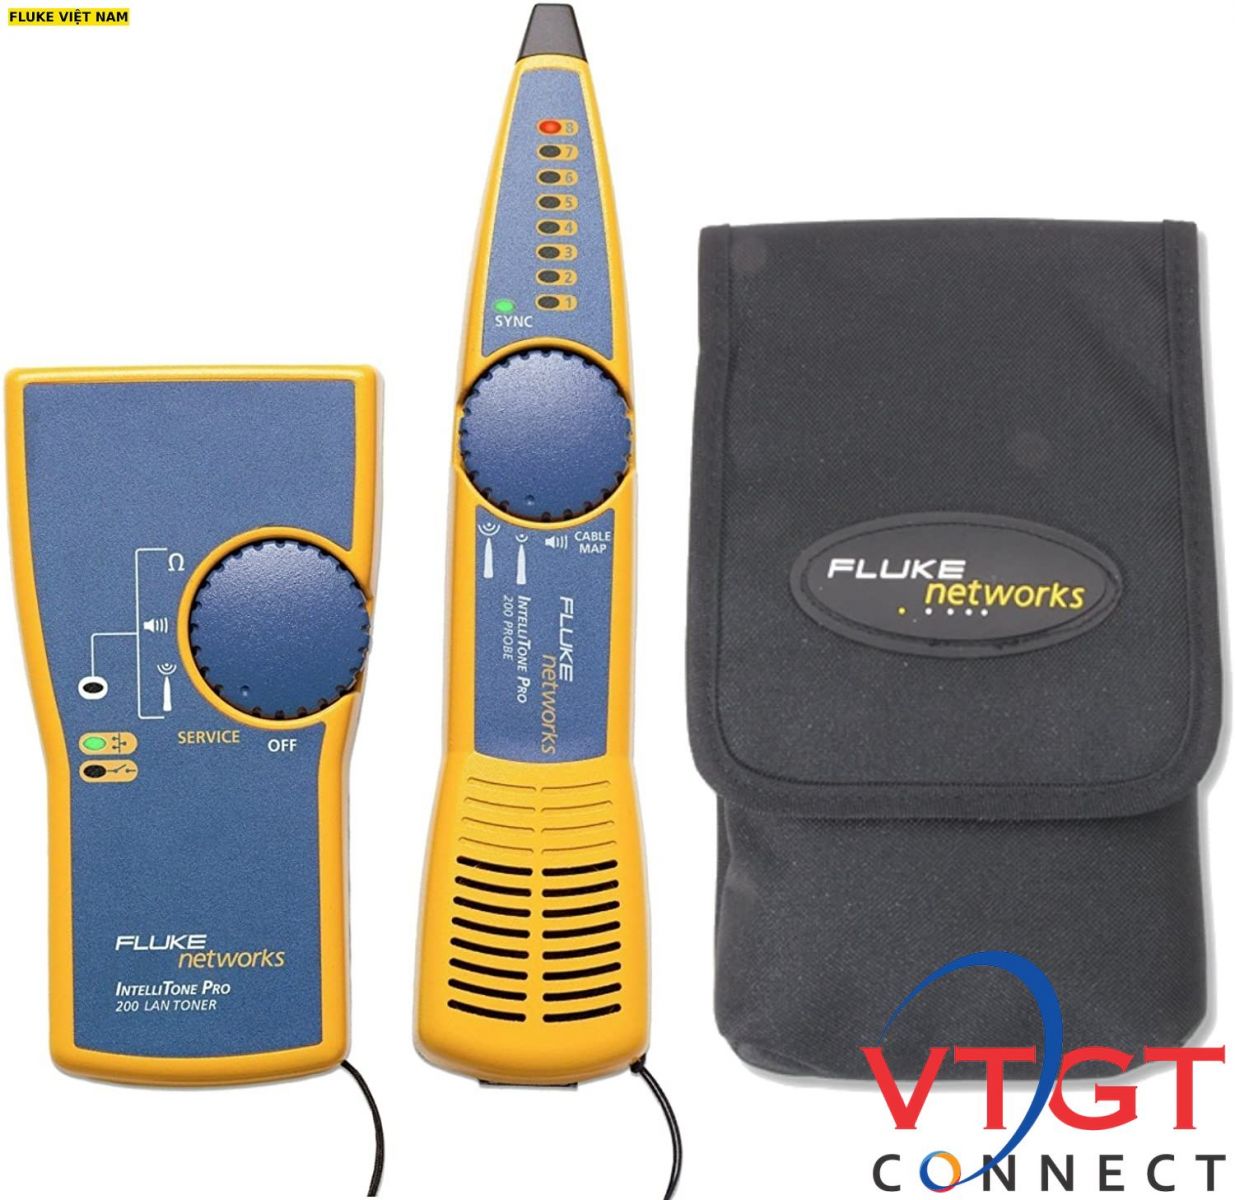 anh-may-test-cap-mang-fulke-network-mt-8200-60